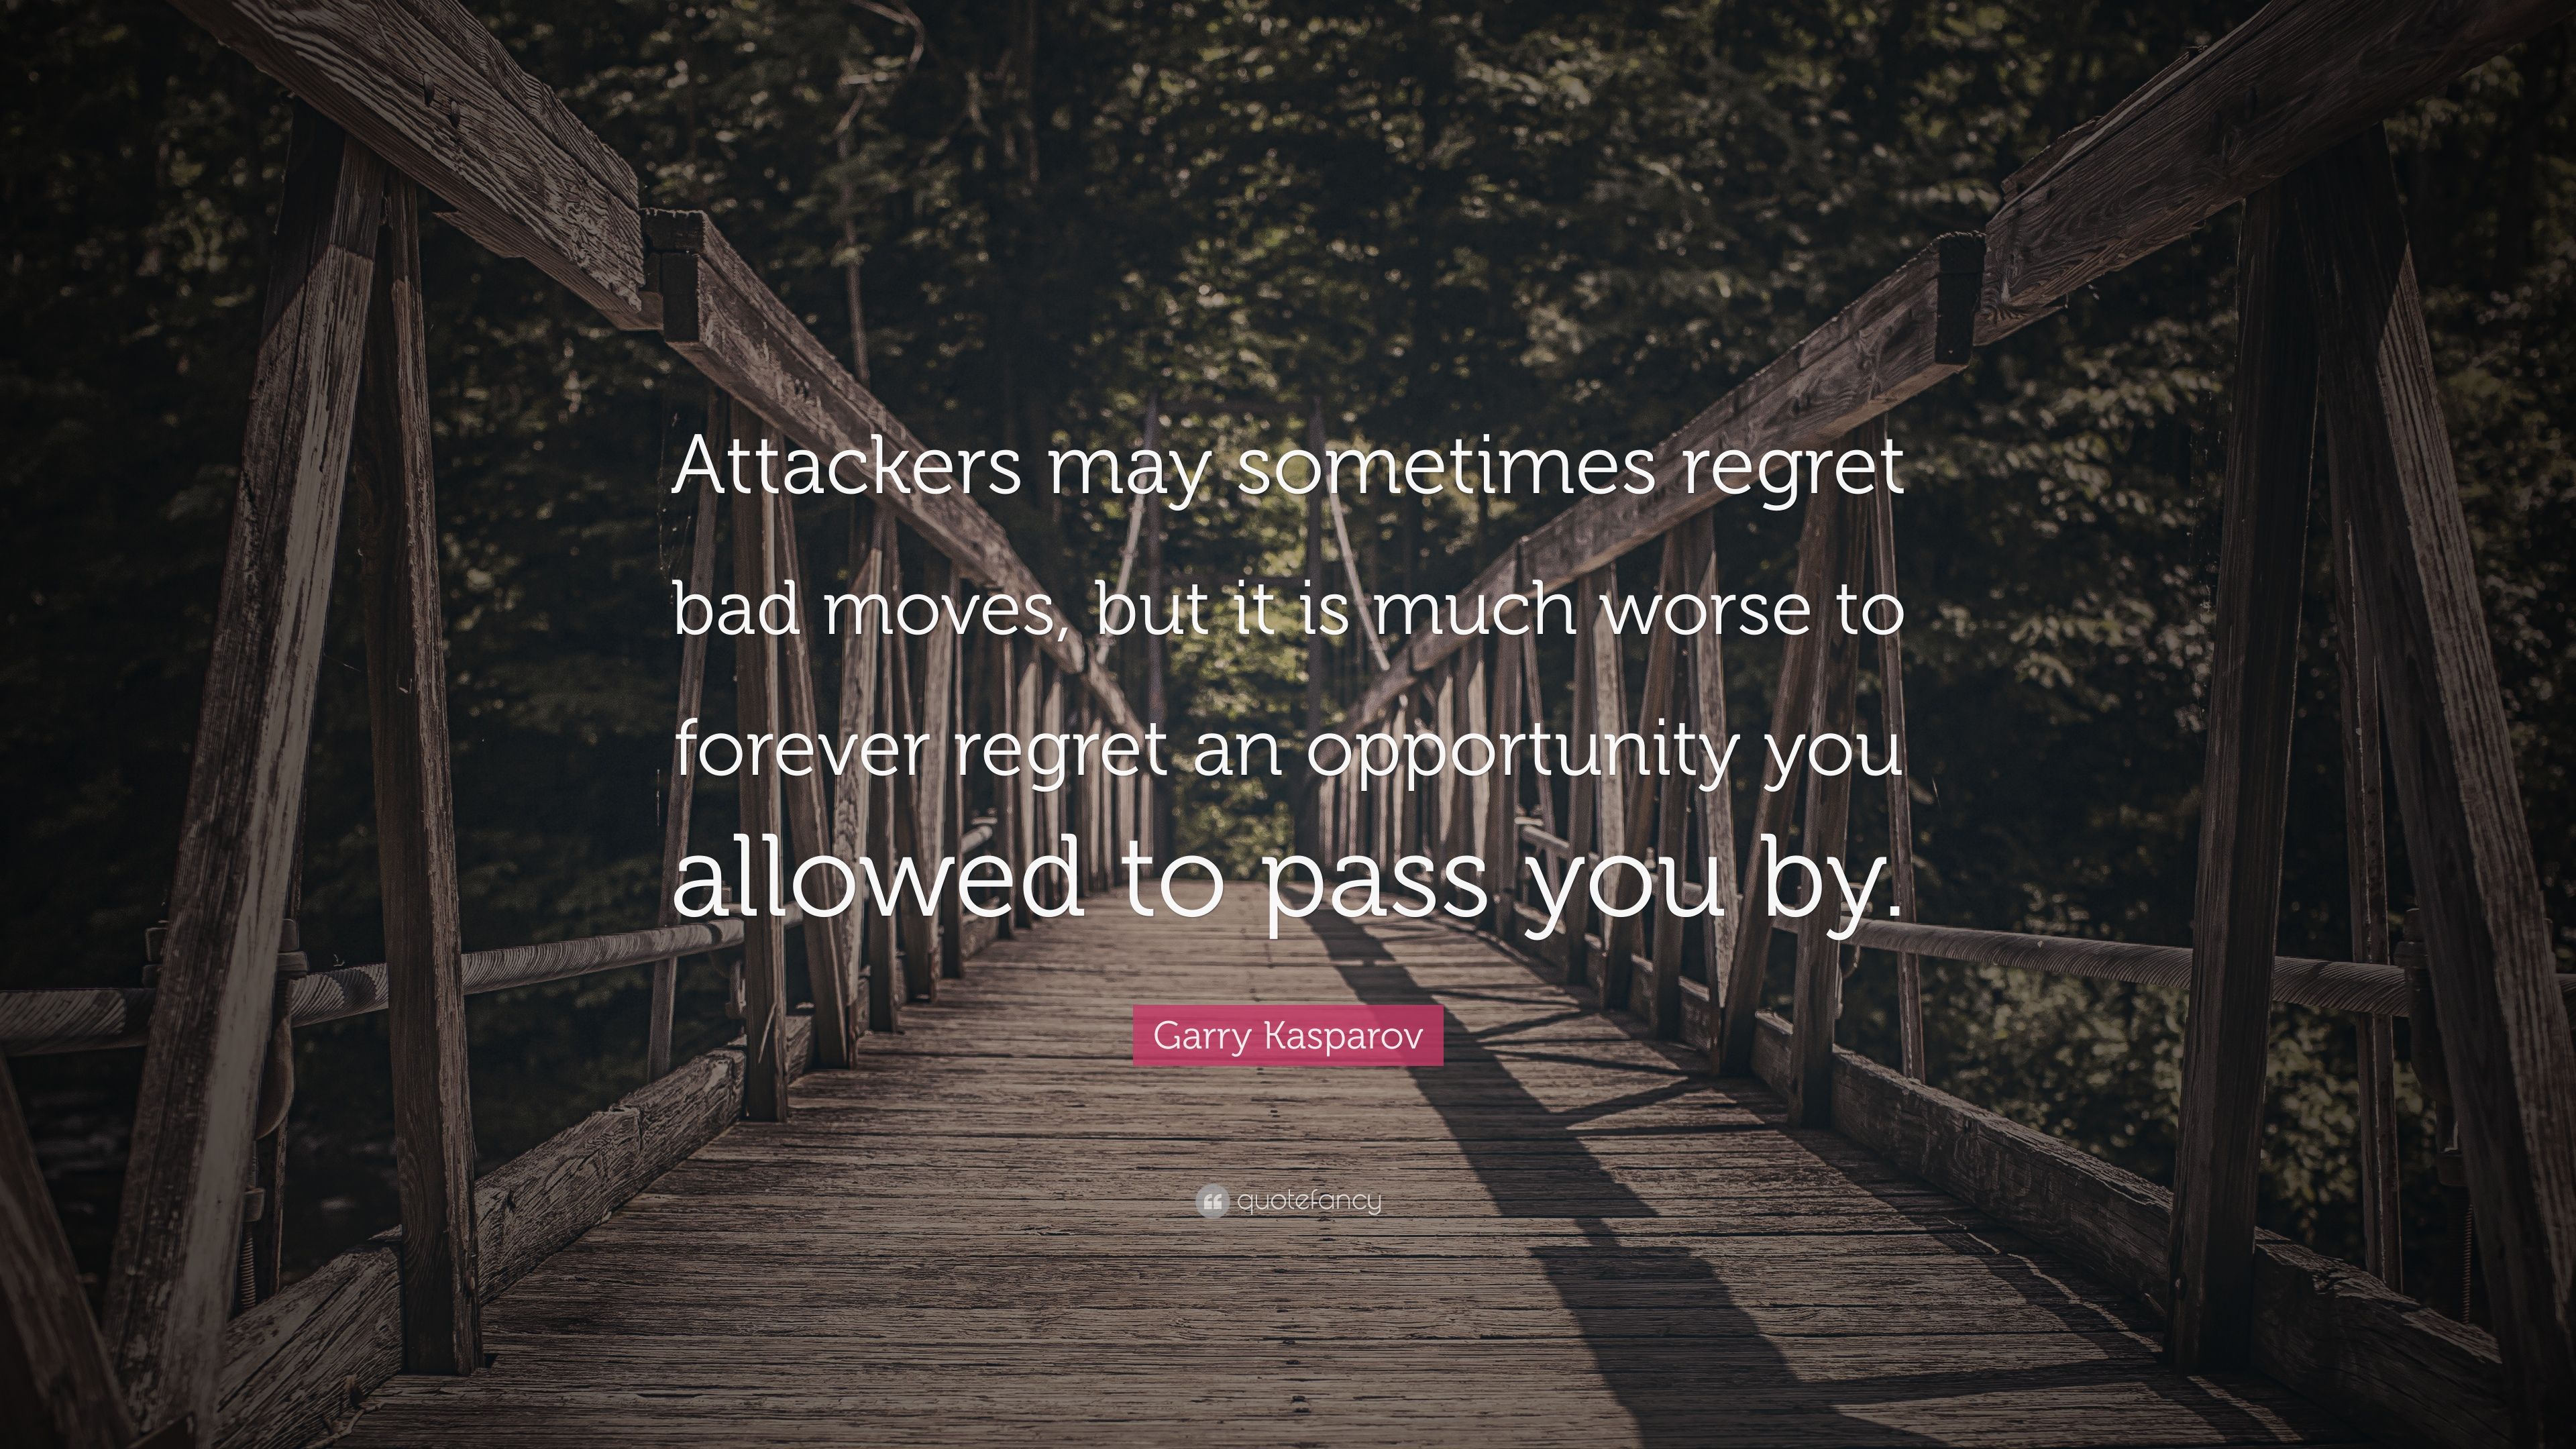 Garry Kasparov Quote: “Attackers may sometimes regret bad moves, but